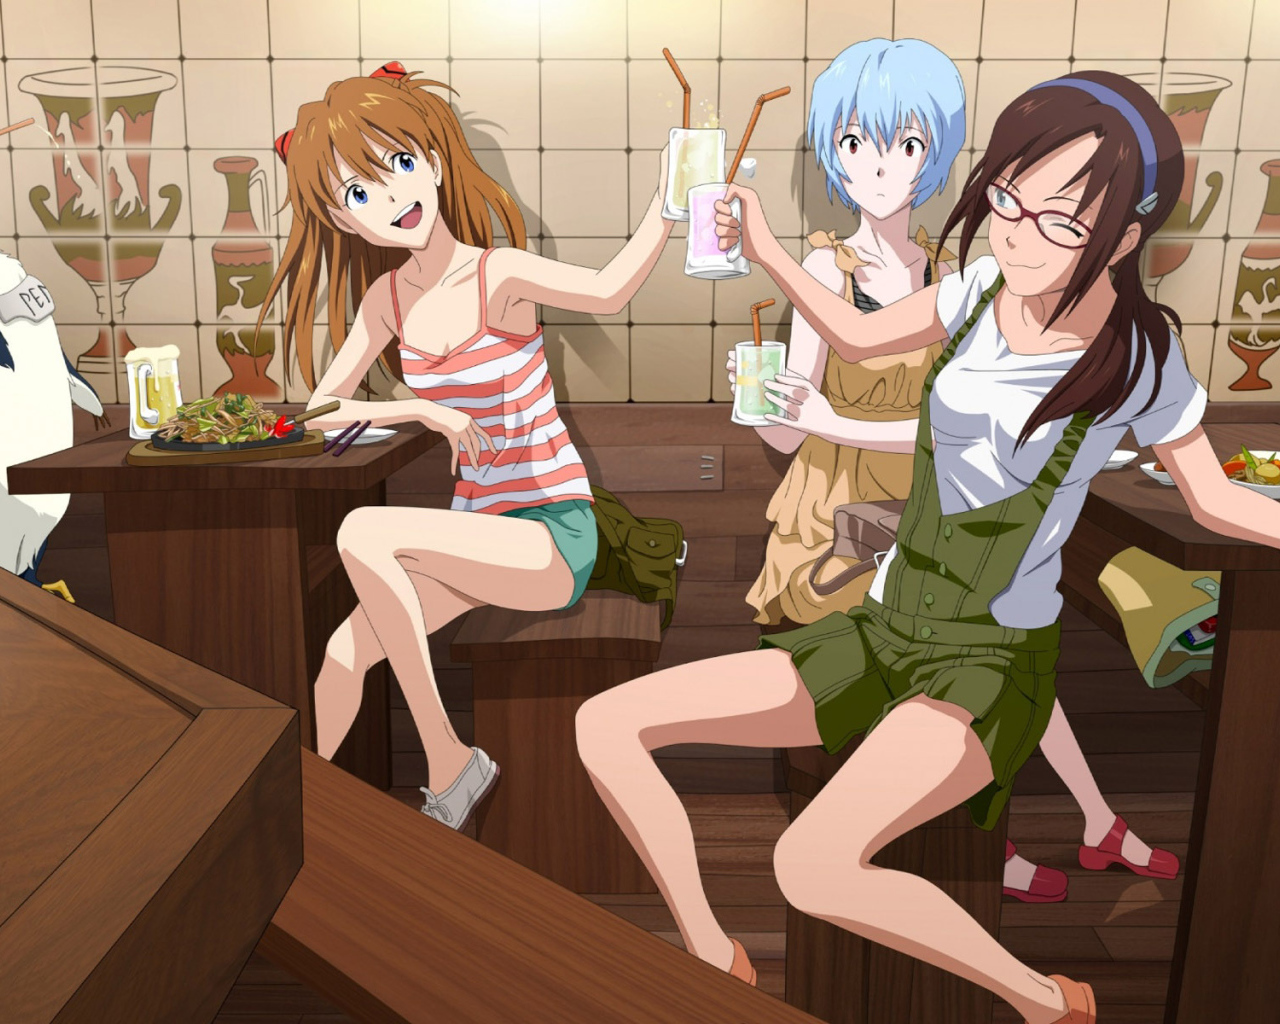 Her friends in a cafe